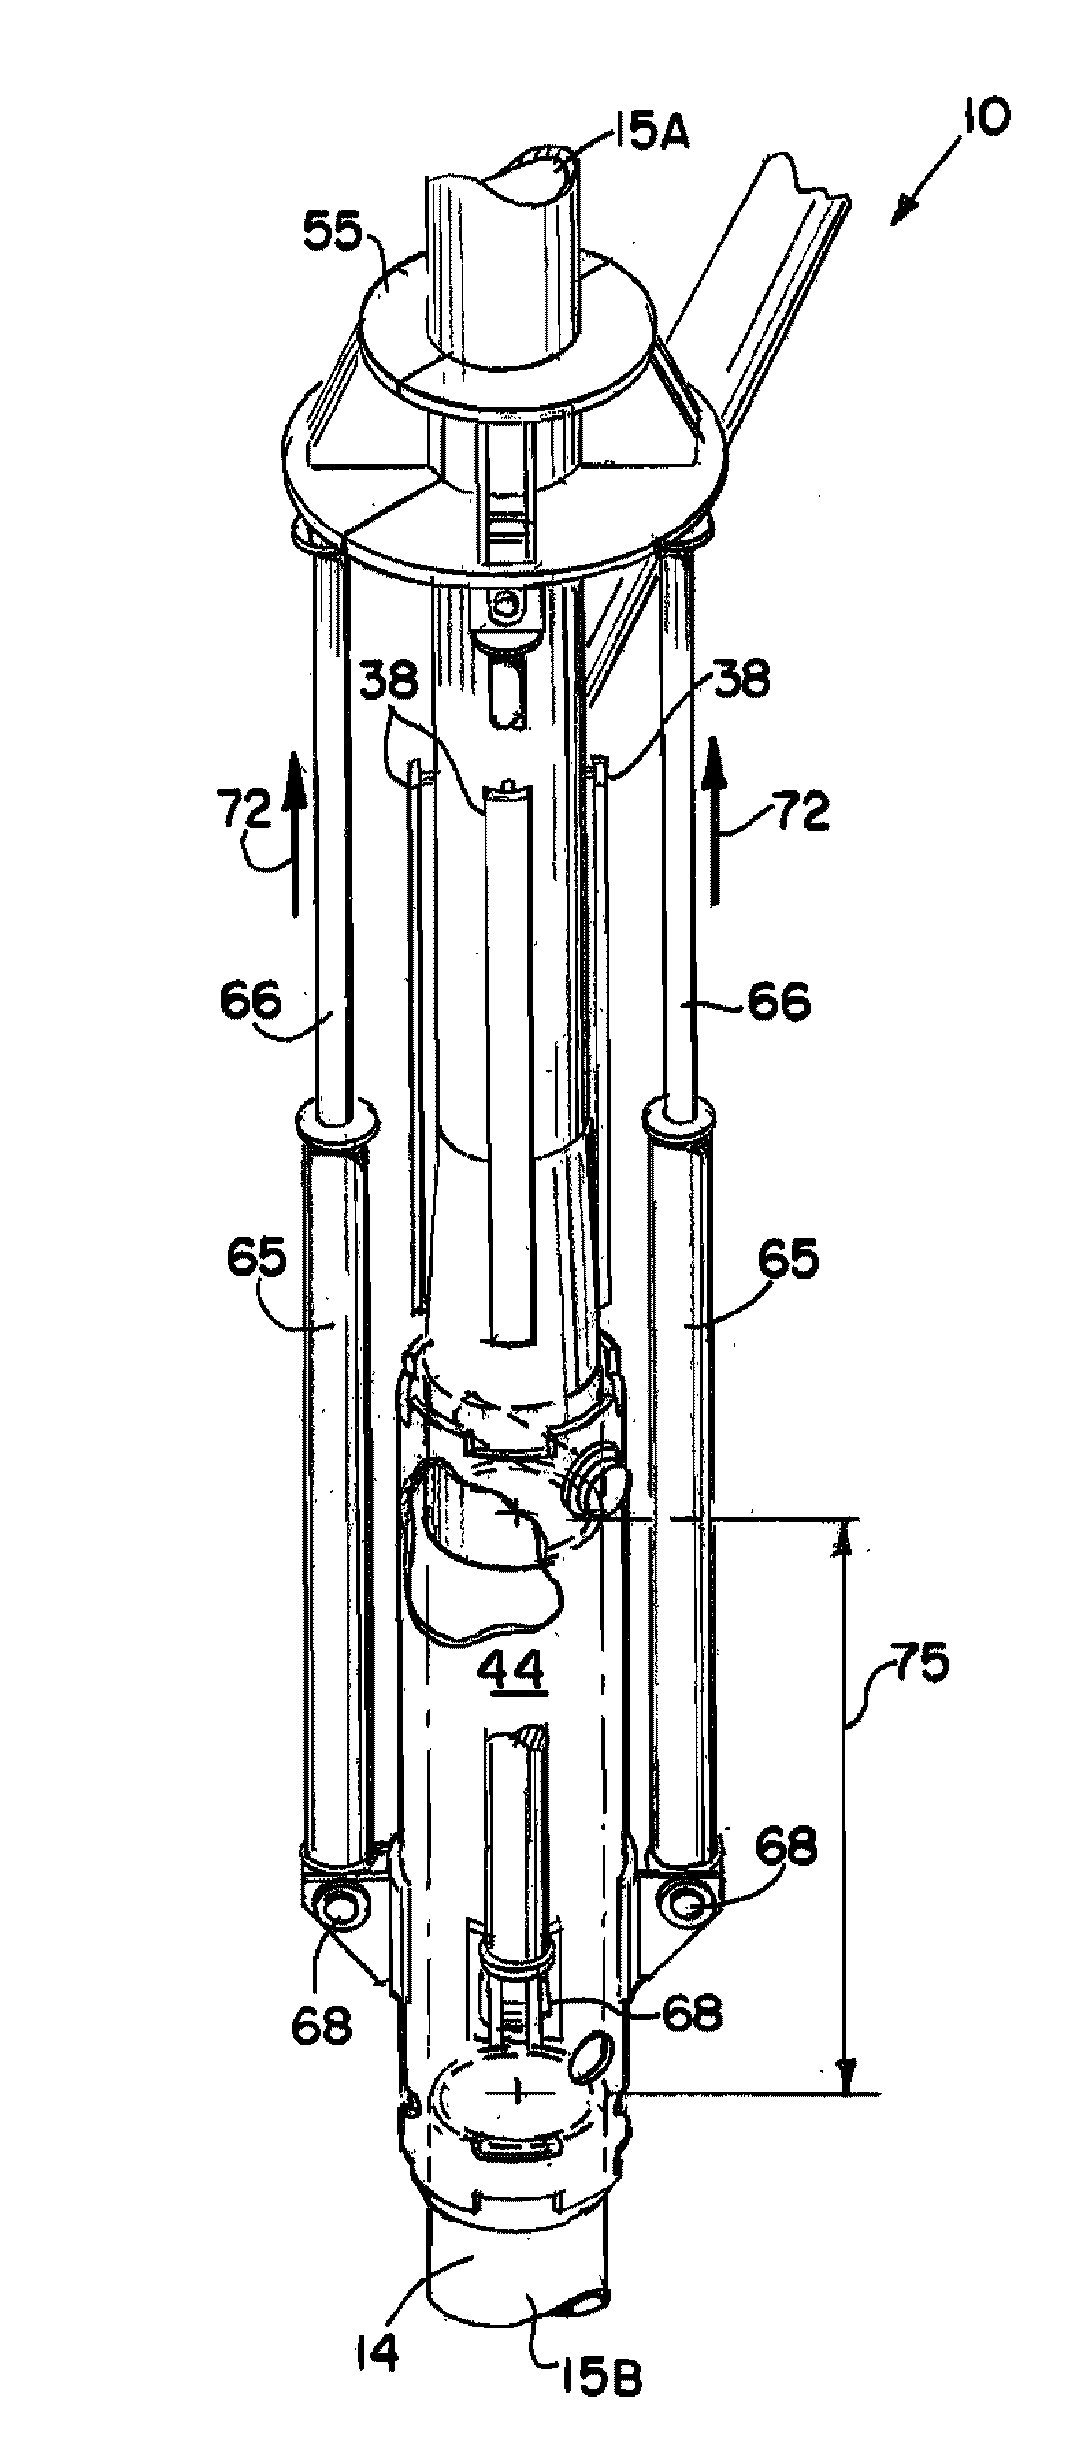 Method and Apparatus for Elevating a Marine Platform